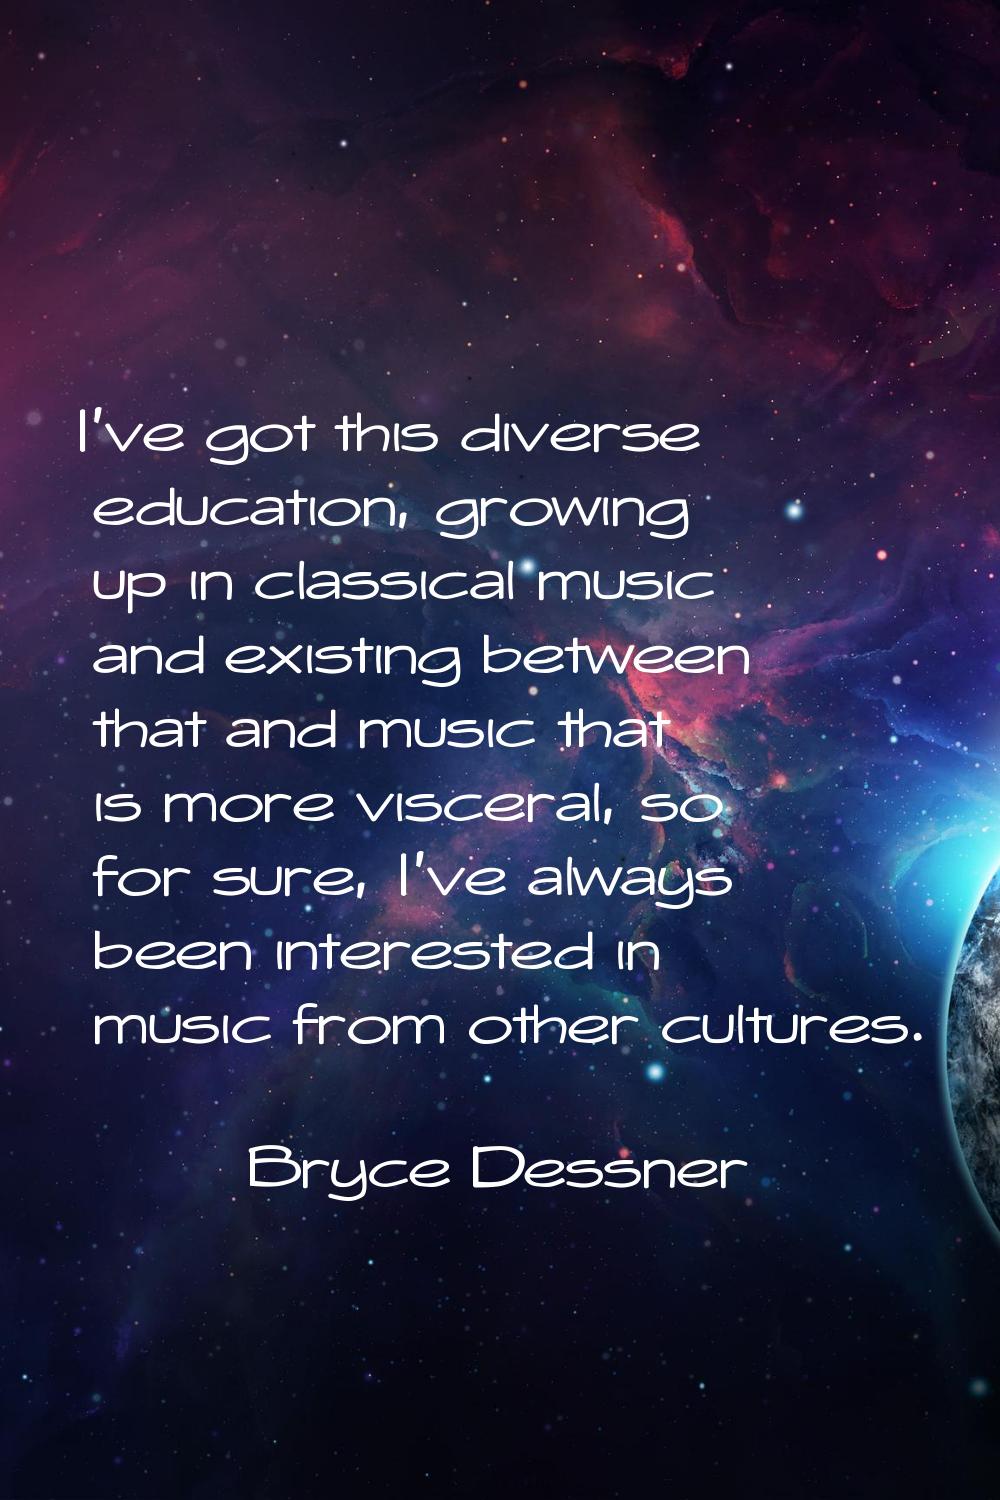 I've got this diverse education, growing up in classical music and existing between that and music 